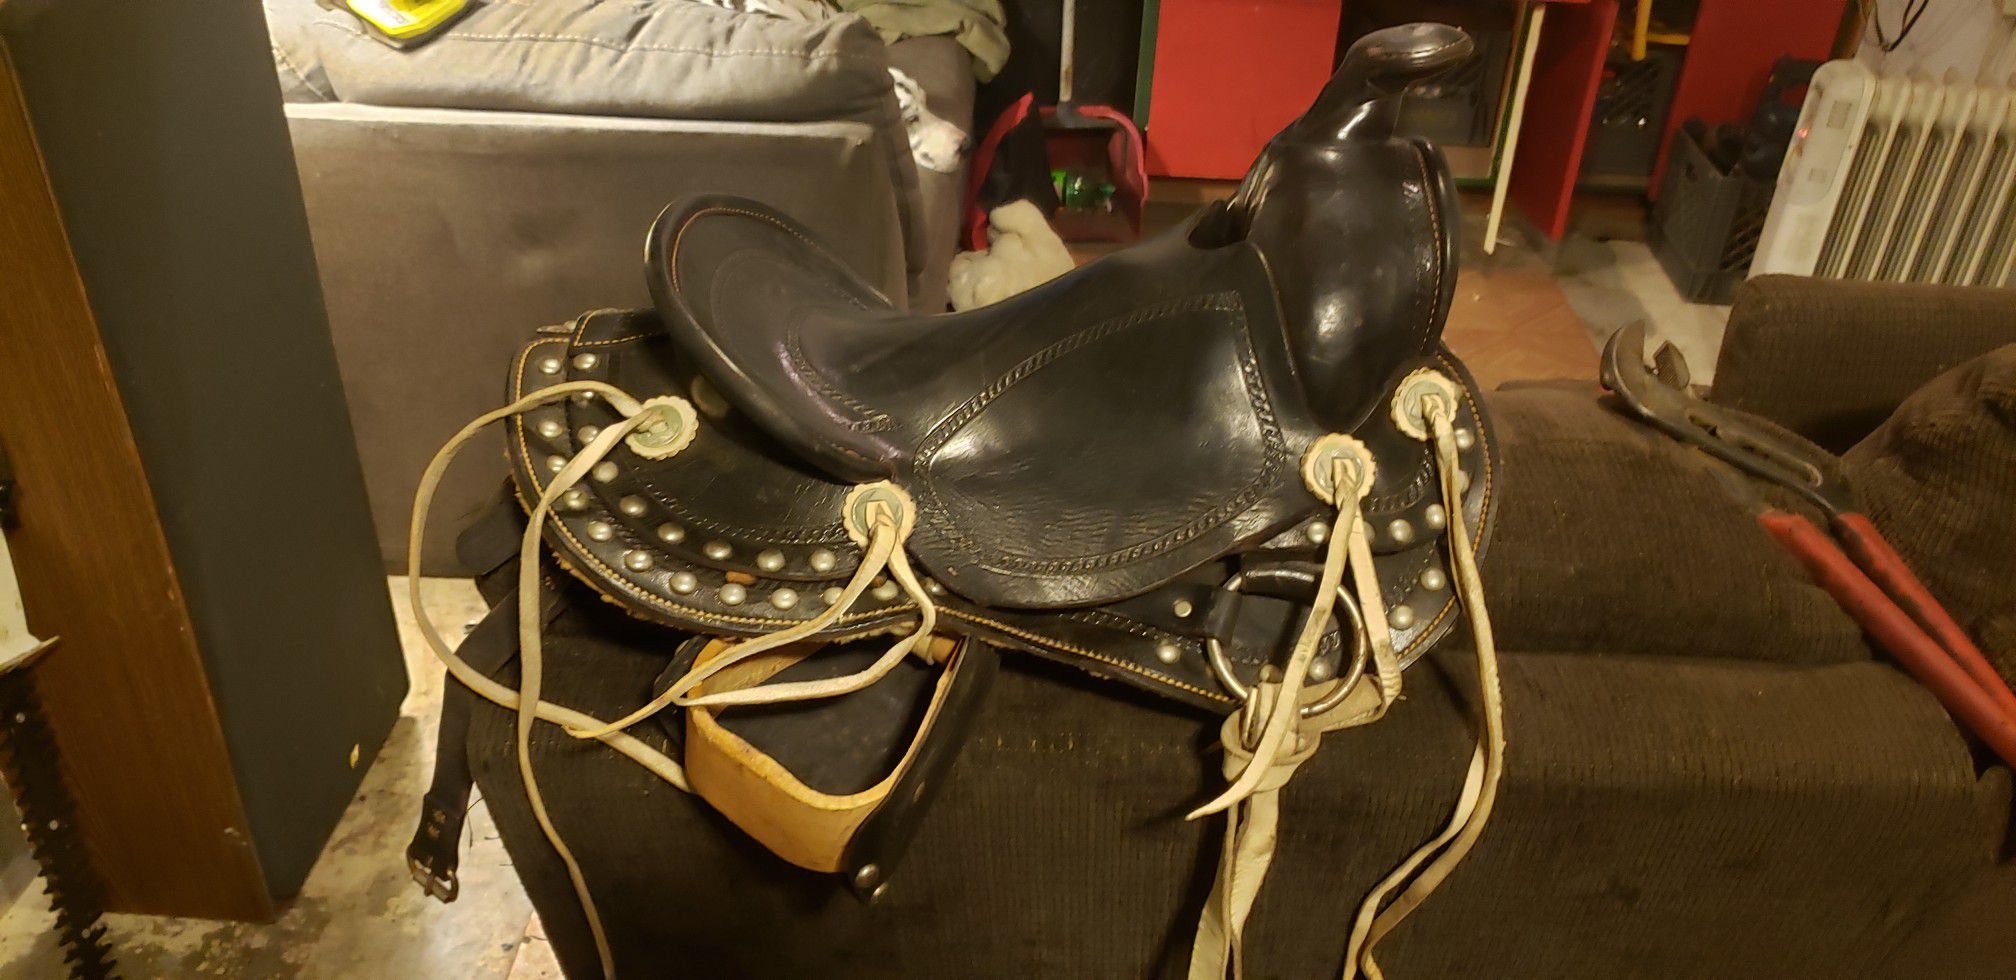 Small western saddle and tack